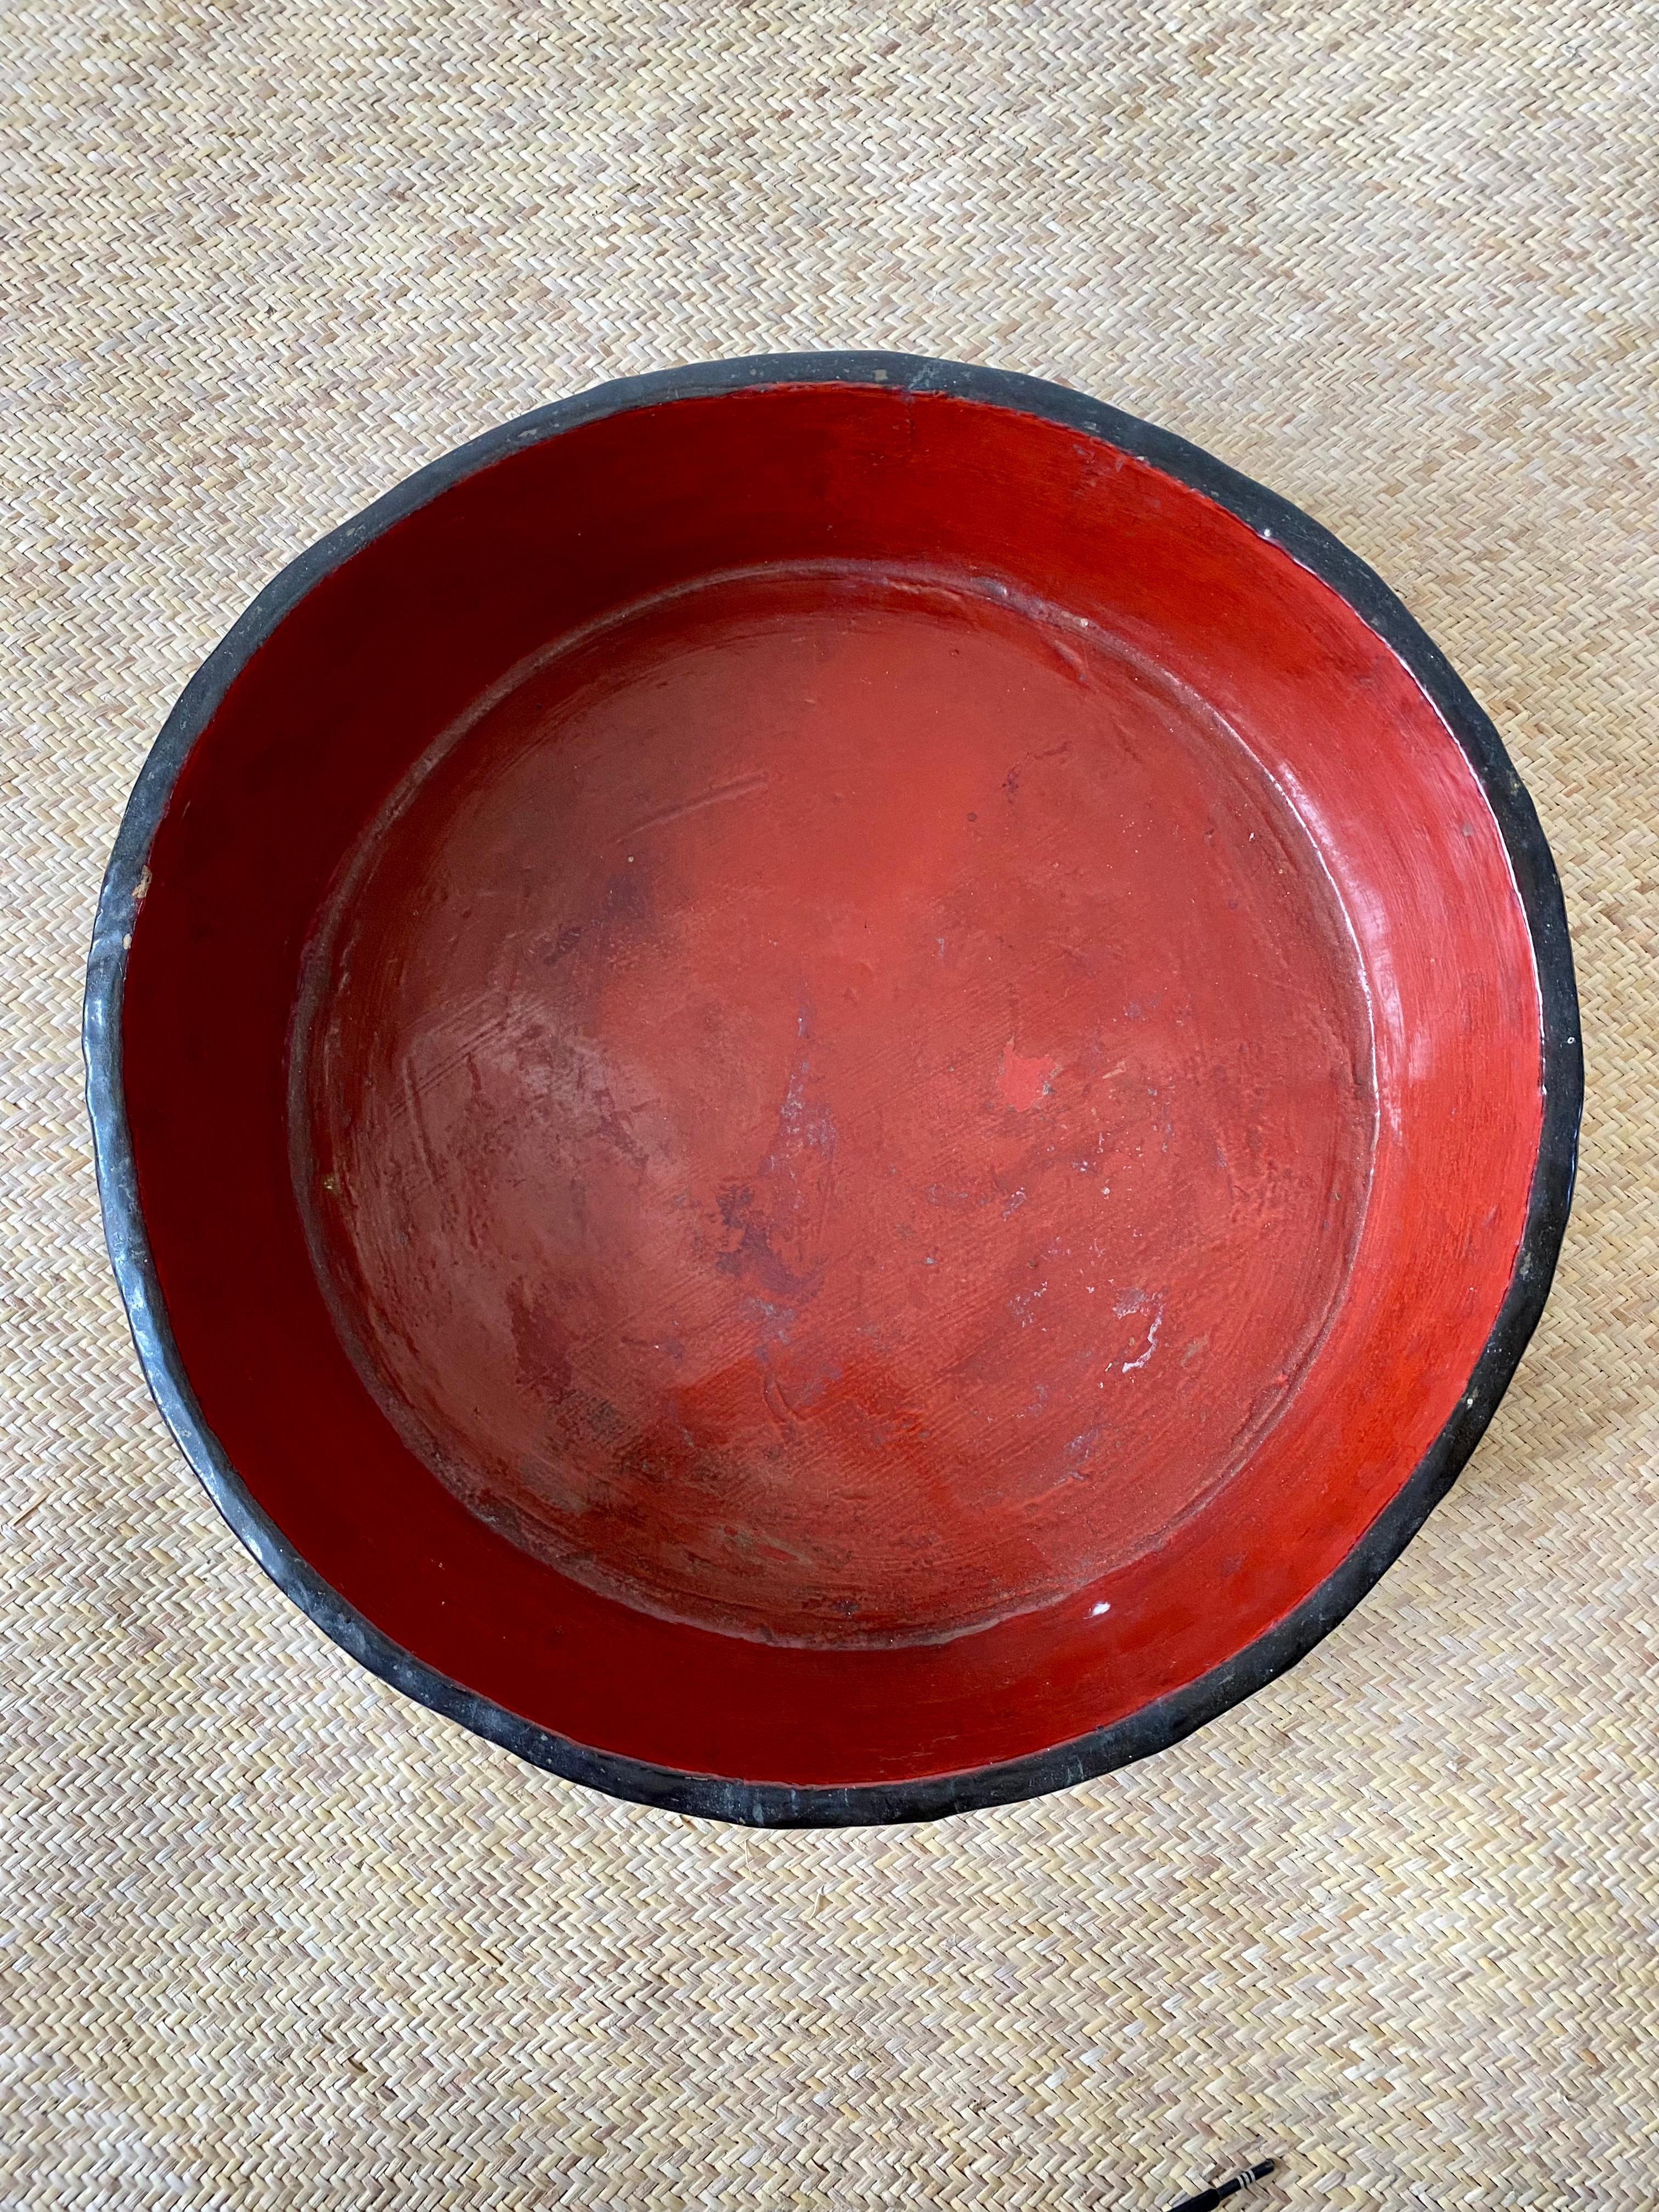 red wooden bowl